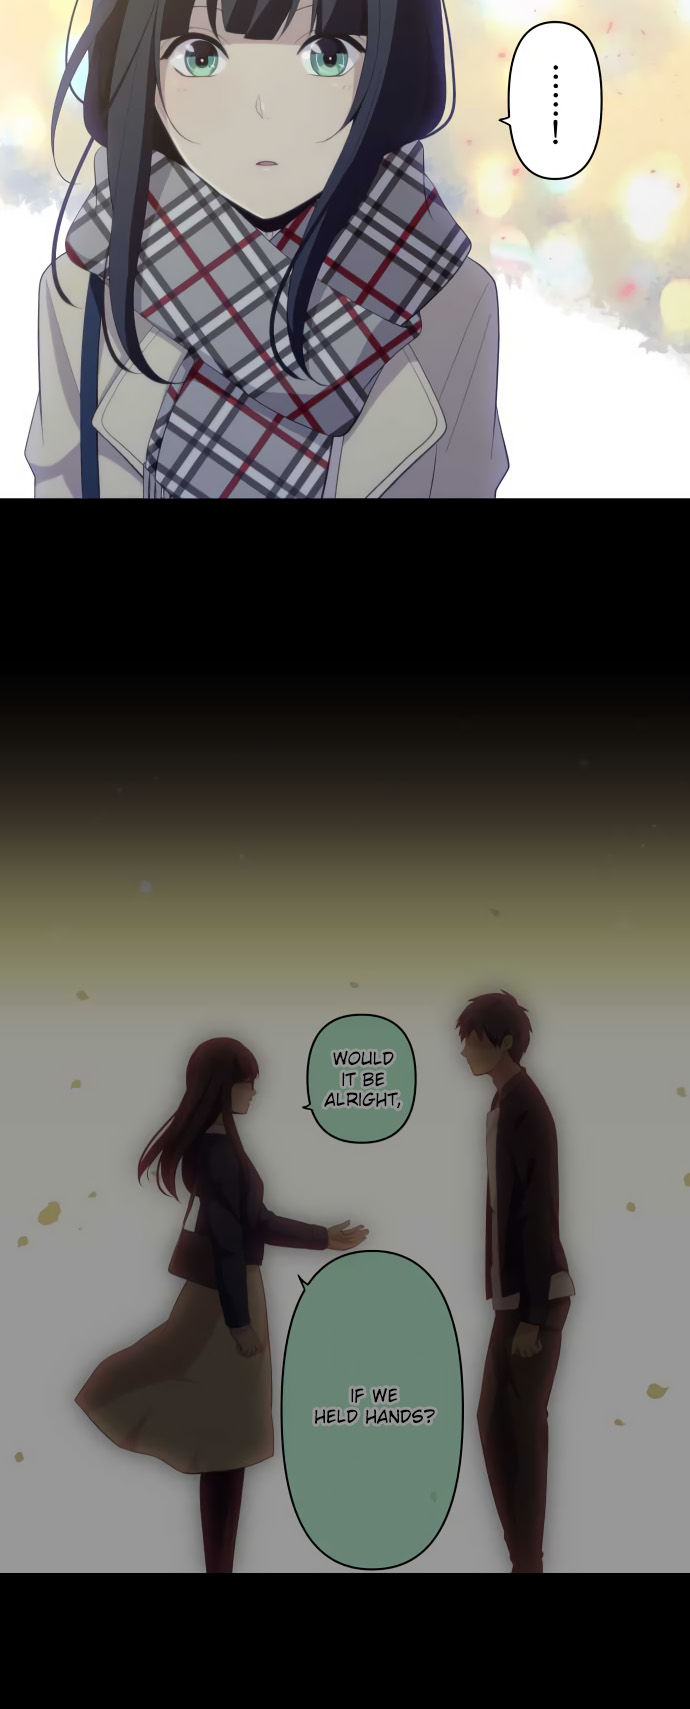 ReLIFE 198